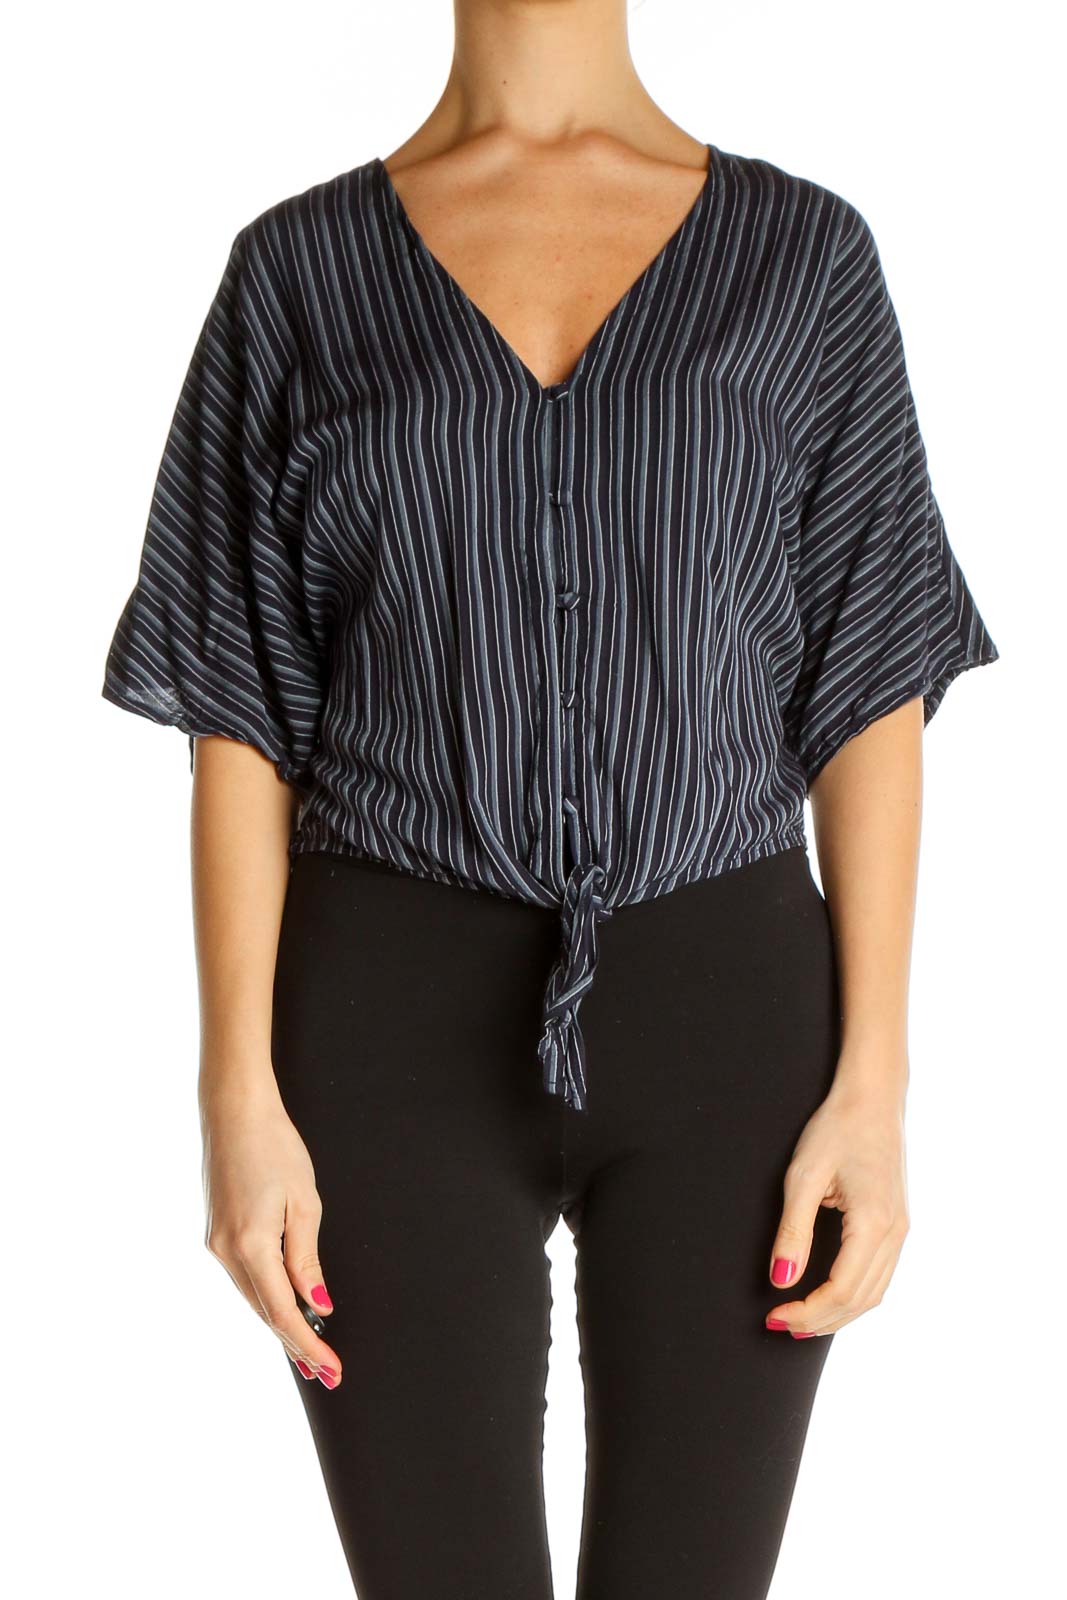 Blue Striped All Day Wear Blouse Front